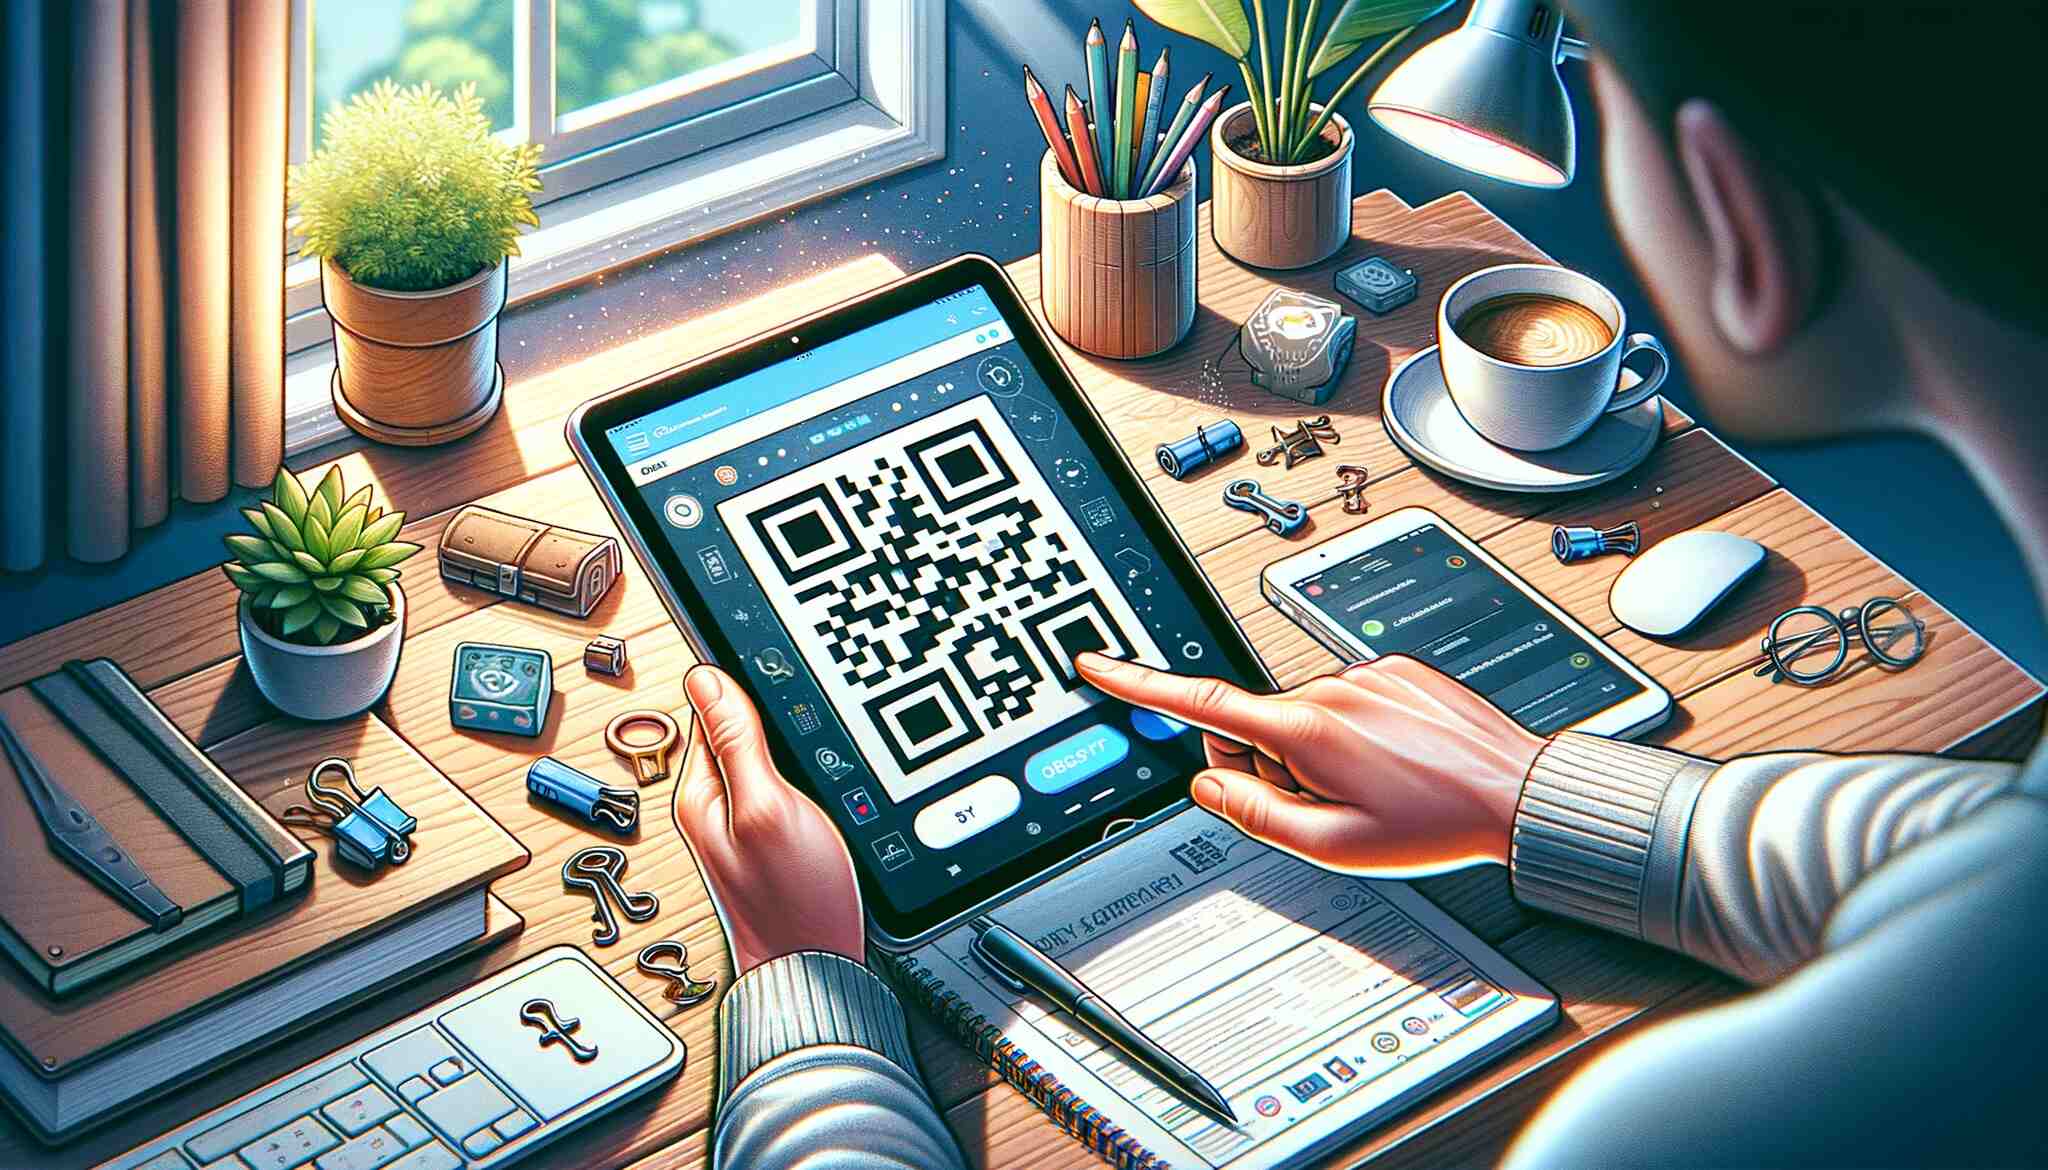  A detailed and vivid illustration showing a person using an iPad to scan a QR code